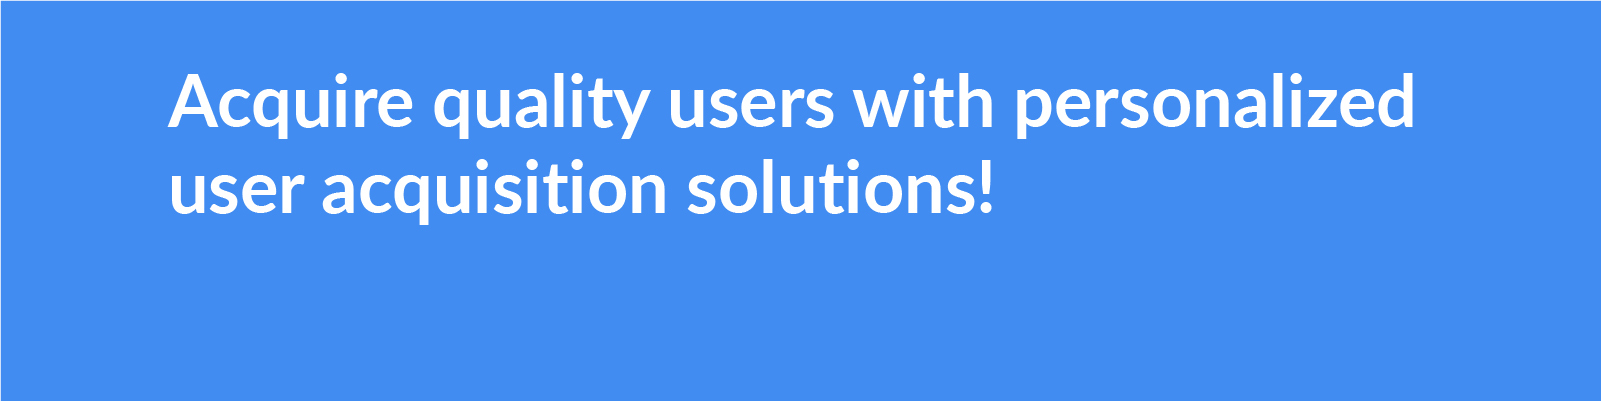 Acquire quality customers with personalized user acquisition services